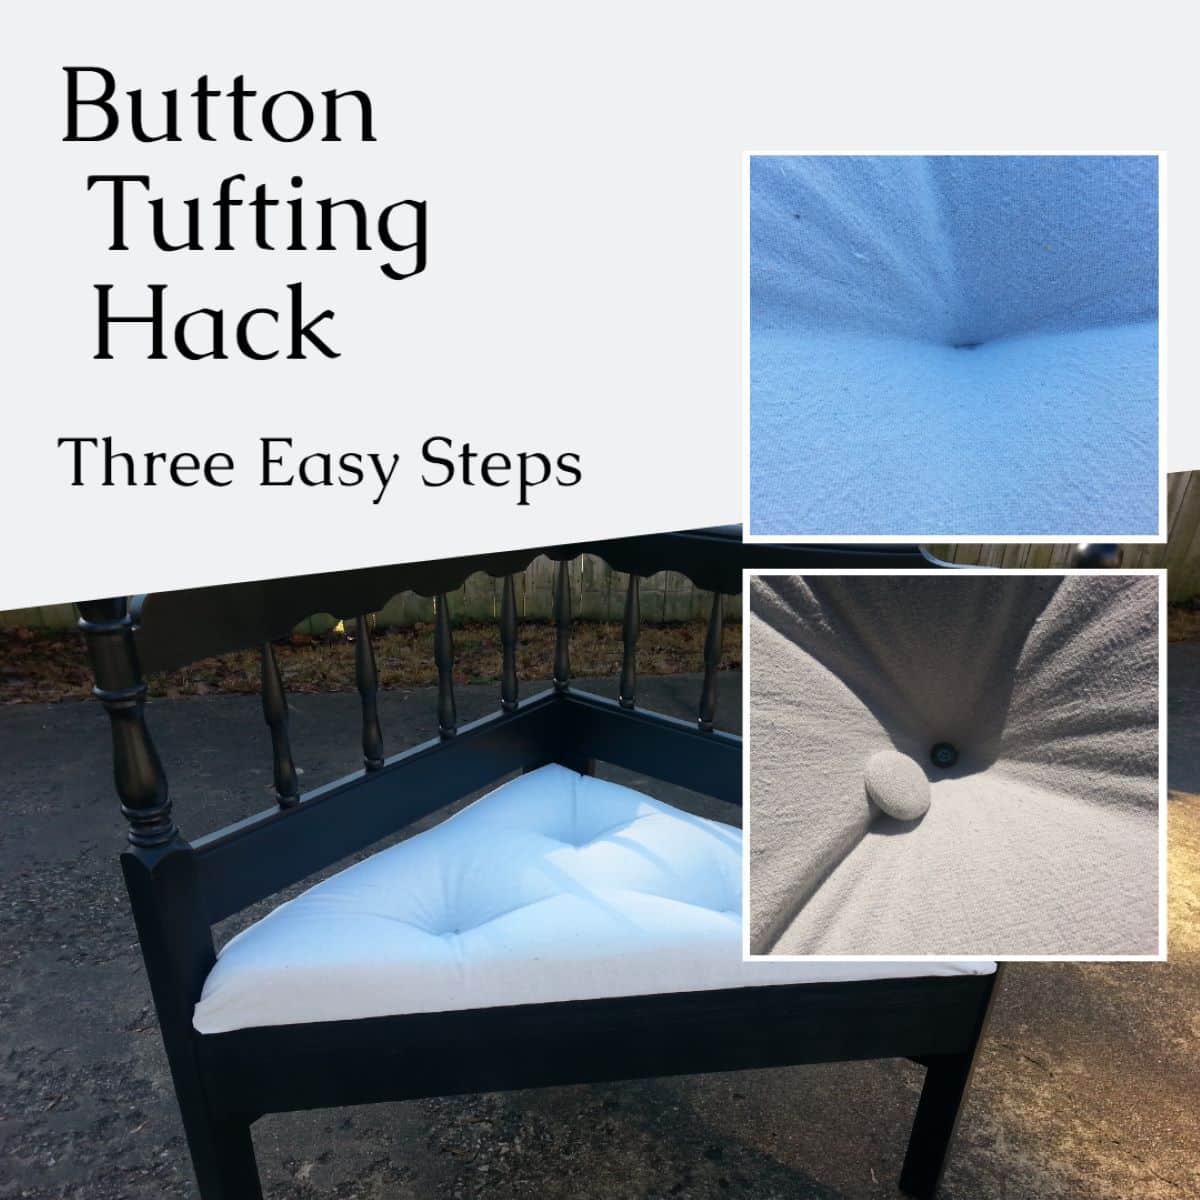 Best Tufting Needle for Upholstery Tufting Projects.